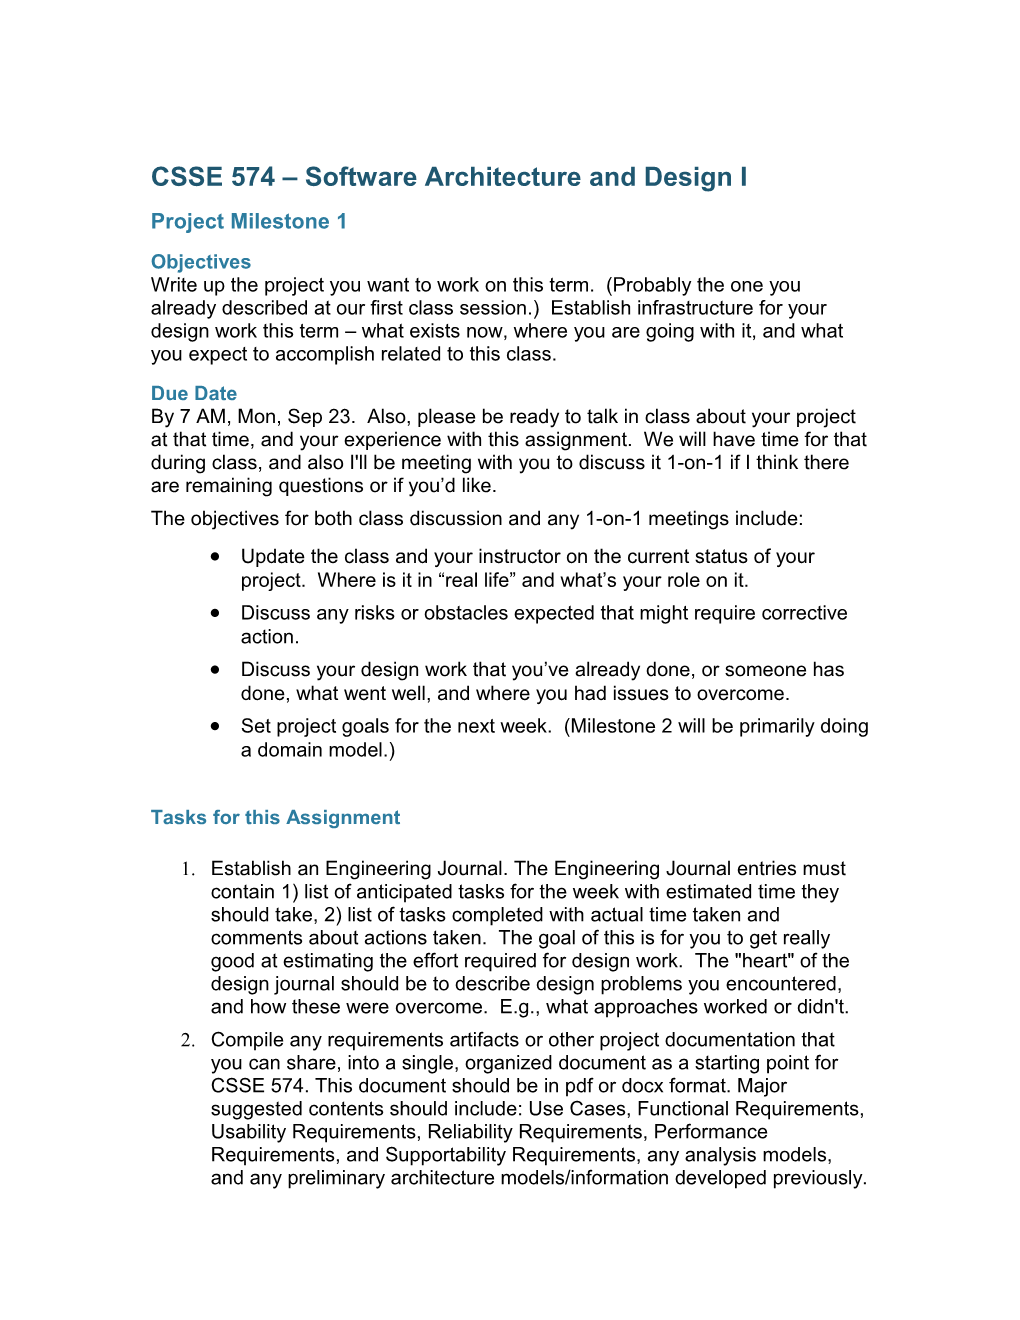 CSSE 574 Software Architecture and Design I